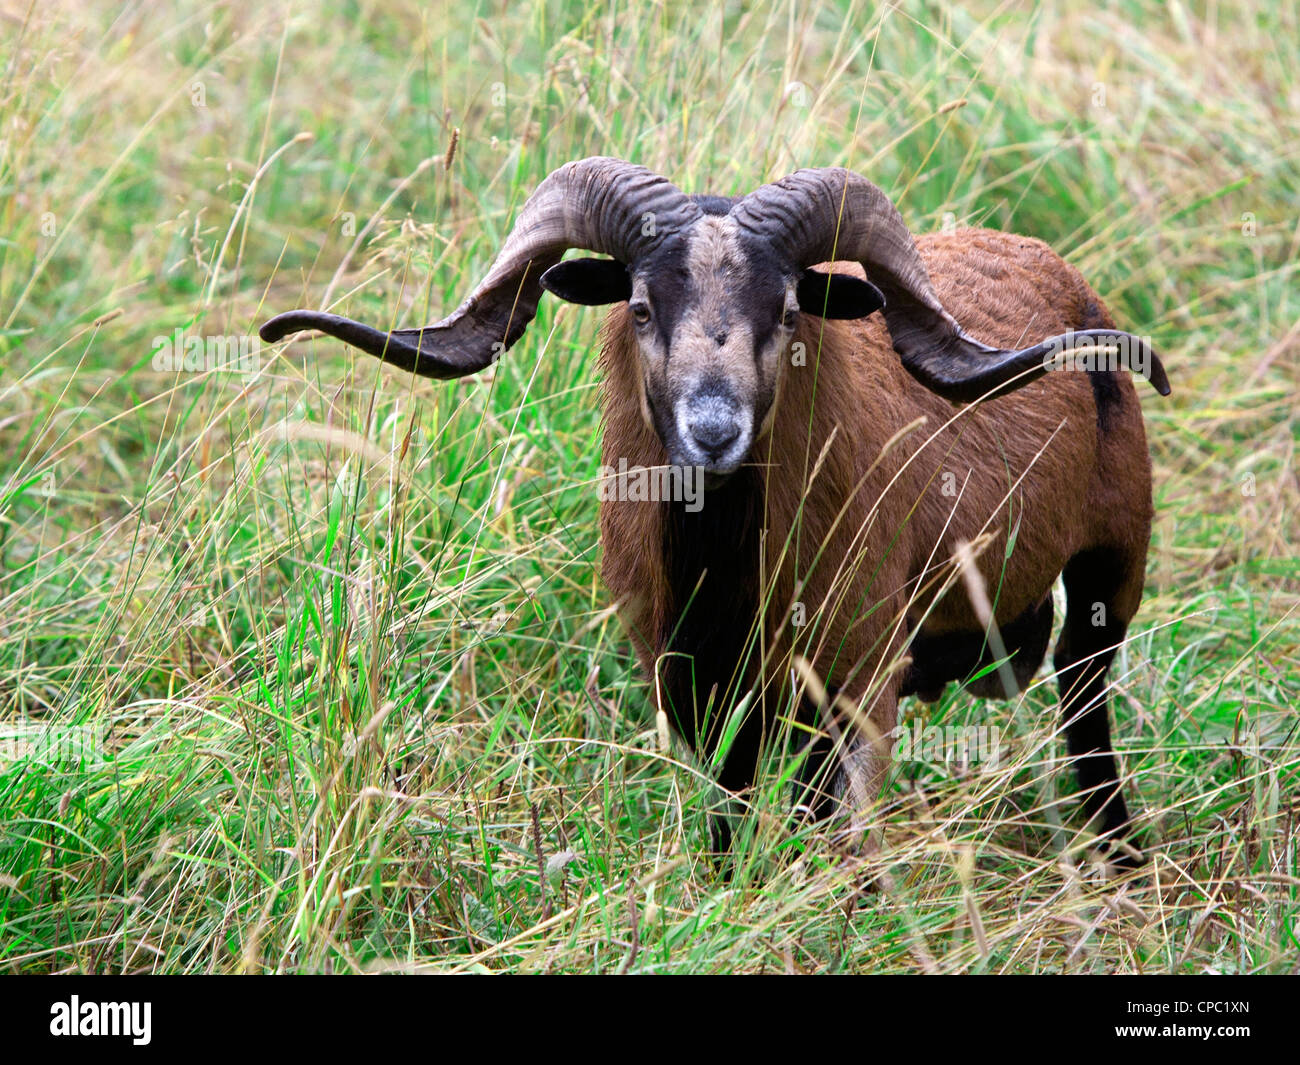 An American blackbellied sheep with majestic horns stands in tall grass. Stock Photo